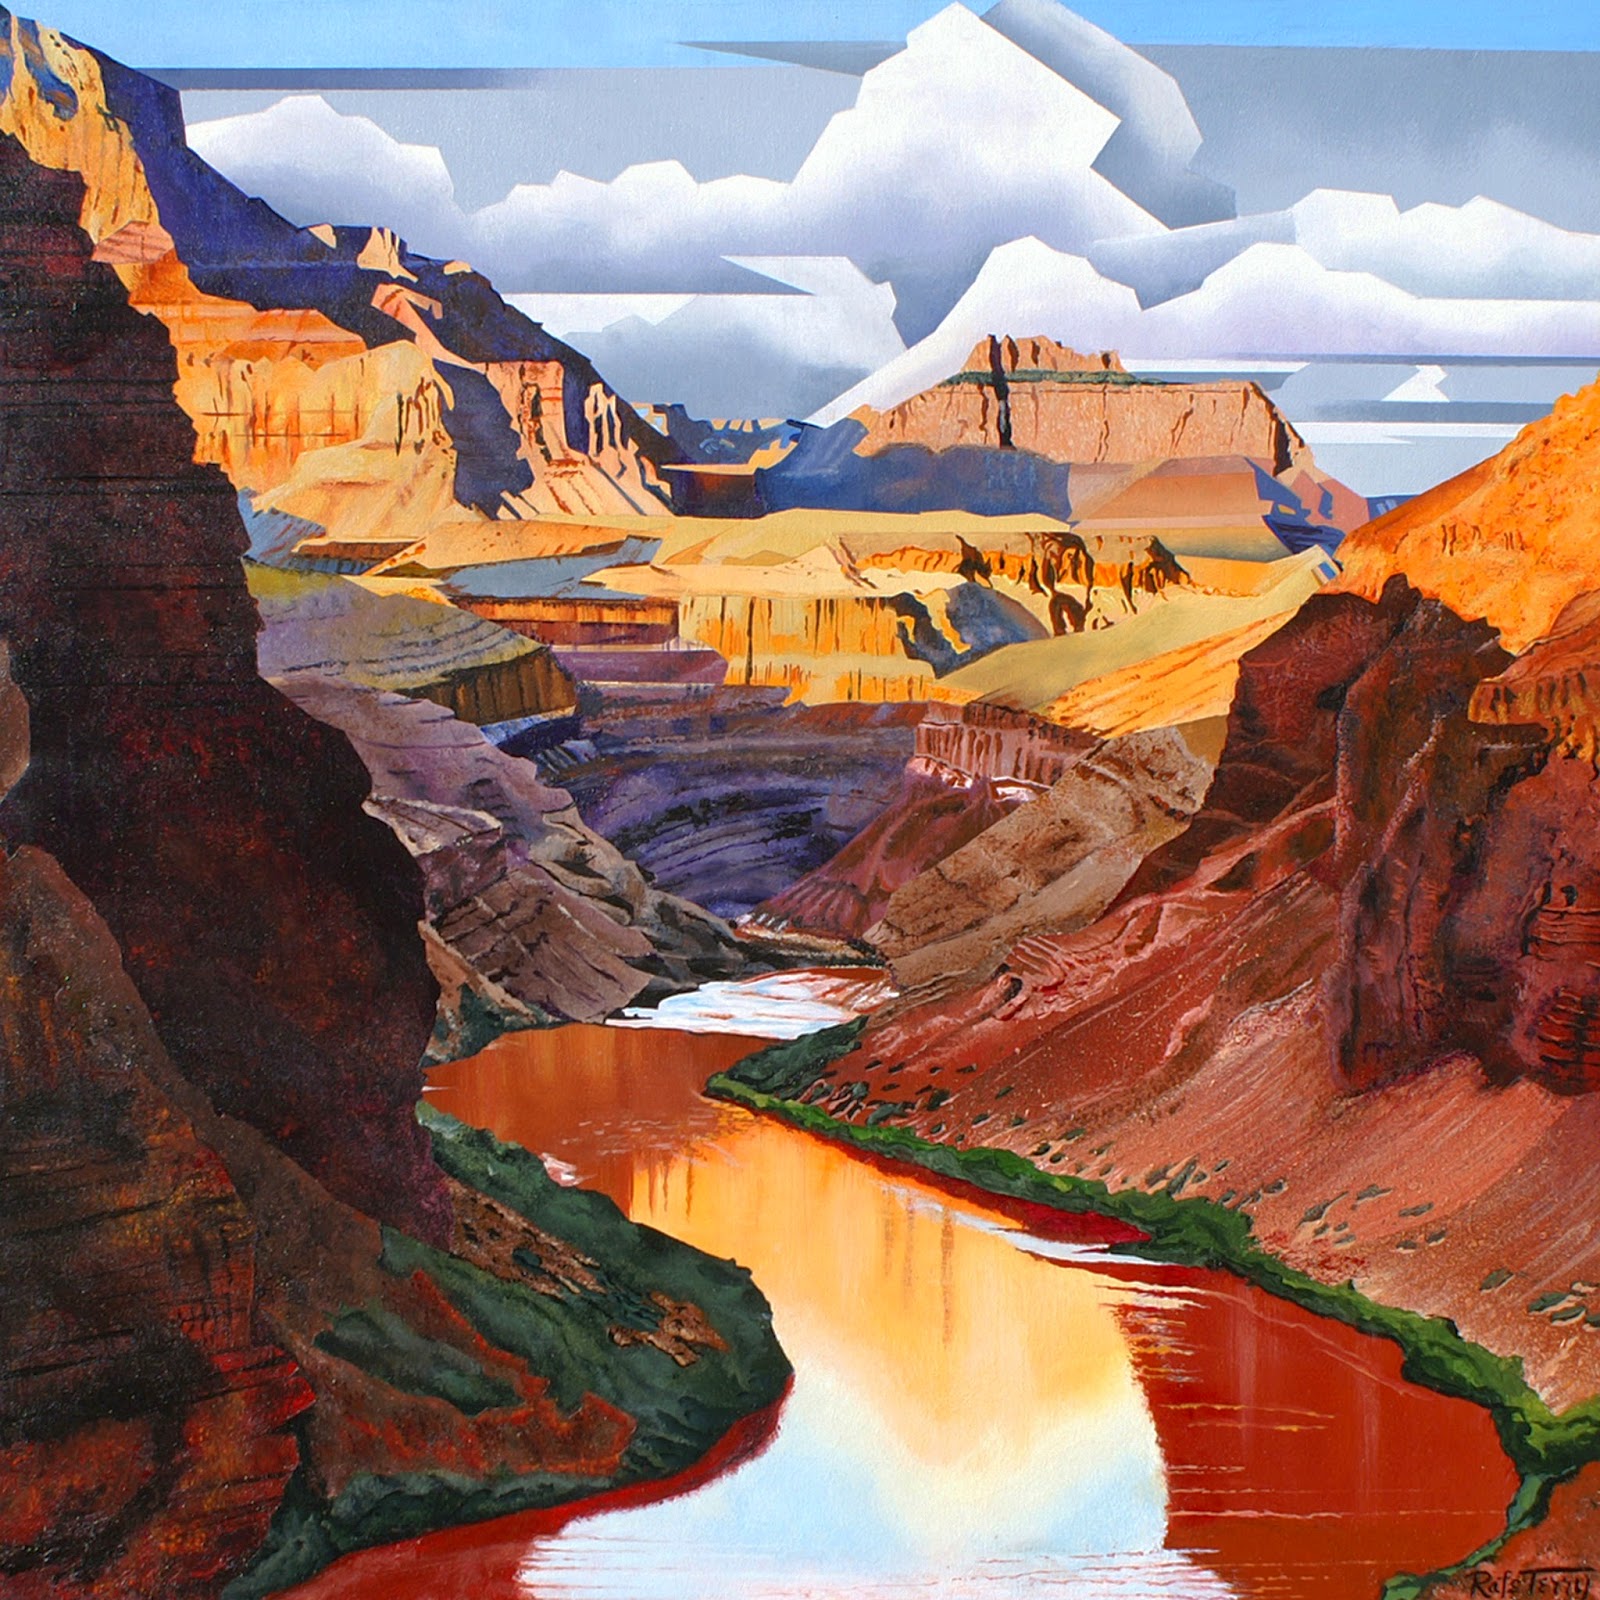 Contemporary Southwest  Landscapes and Flowers: "Colorado River Reflections"